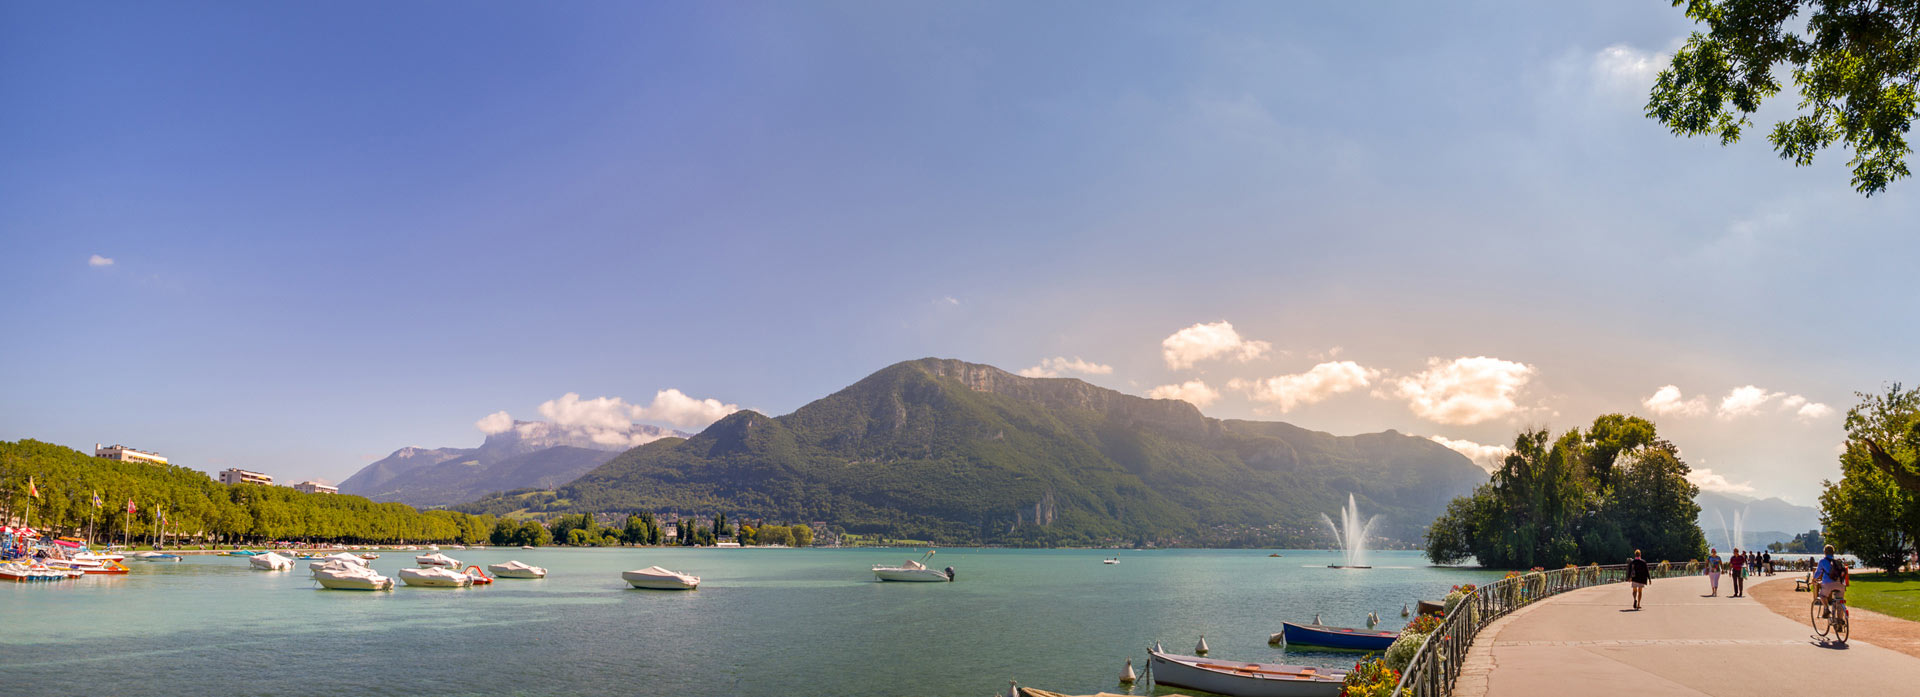 Weekend on the shores of Lake Annecy - 2 day Annecy itinerary